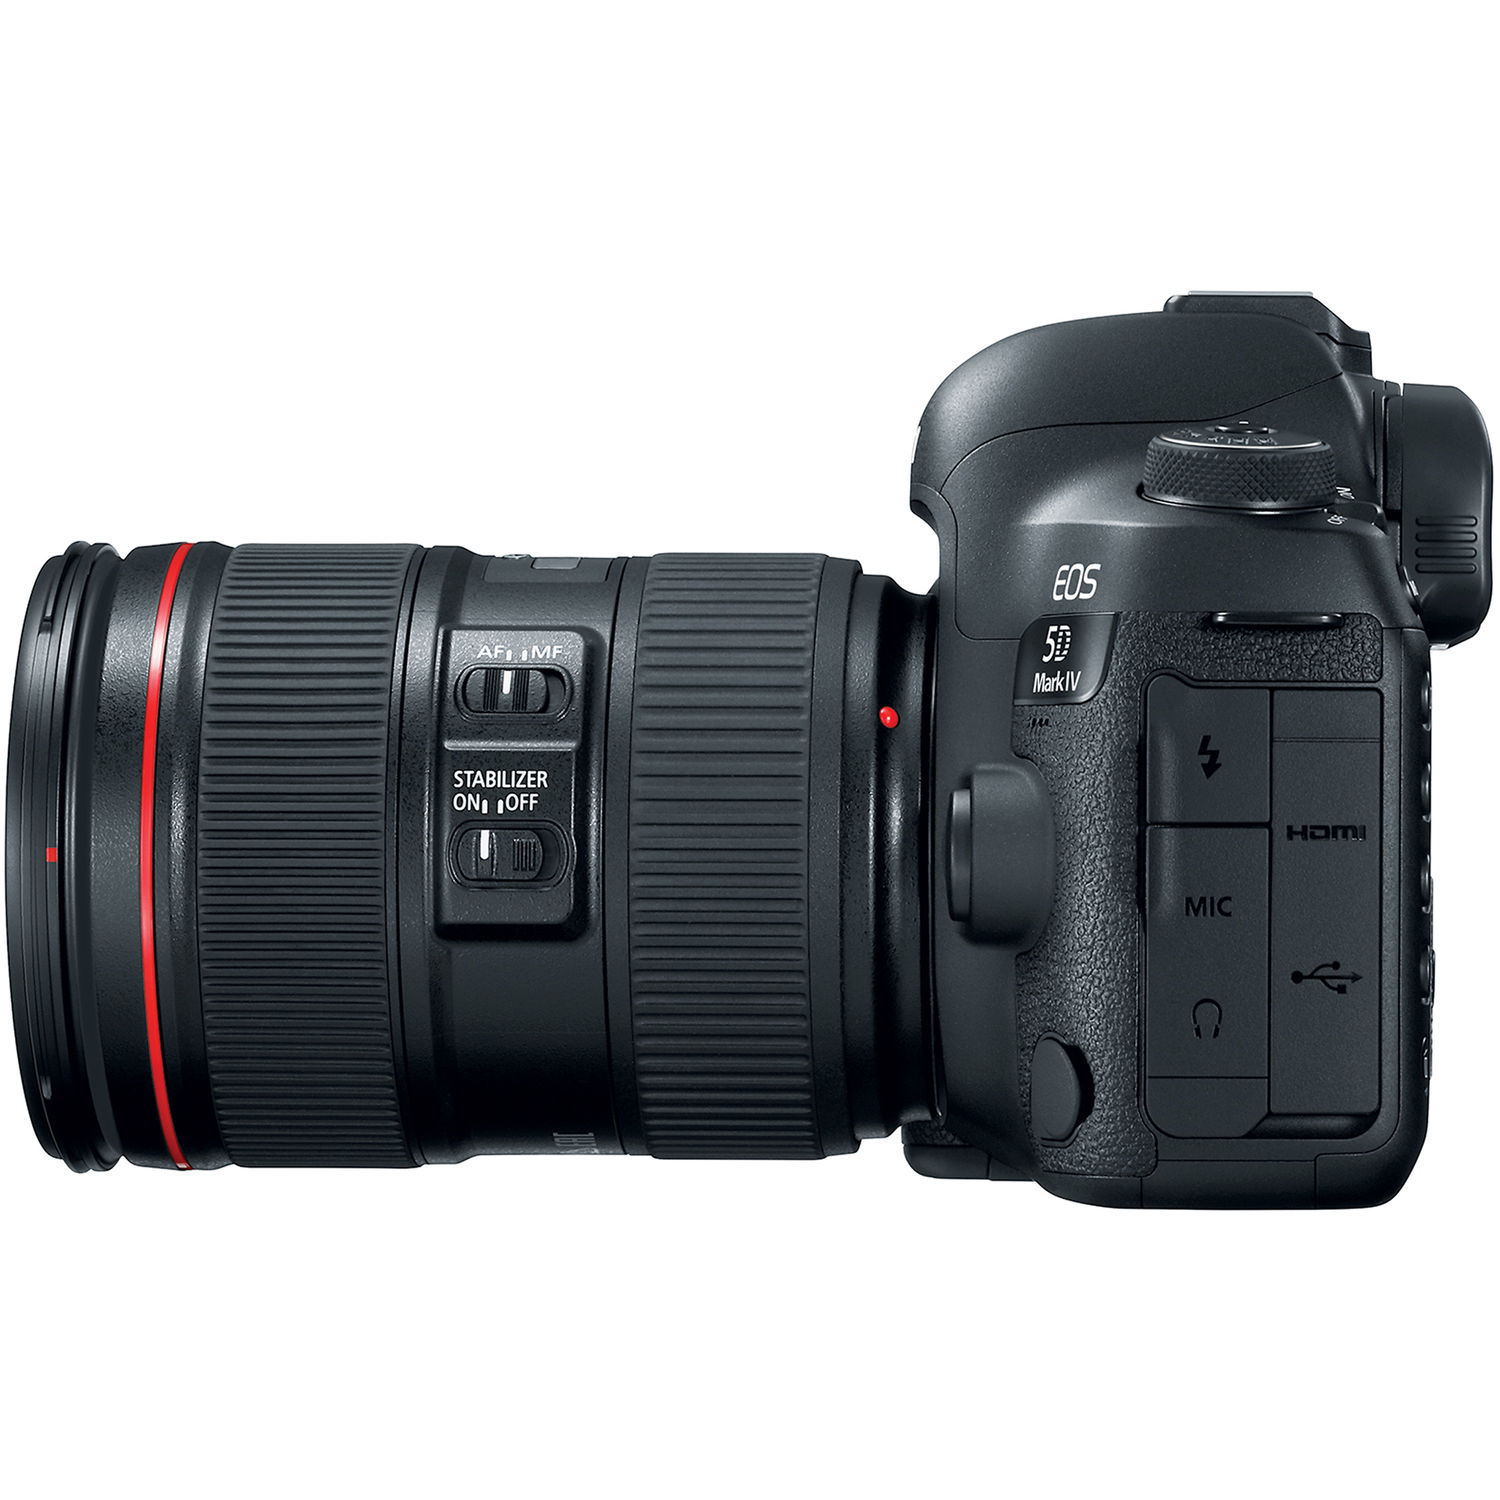 Canon EOS 5D Mark IV DSLR Camera with 24-105mm F/4L II Lens - image 3 of 4